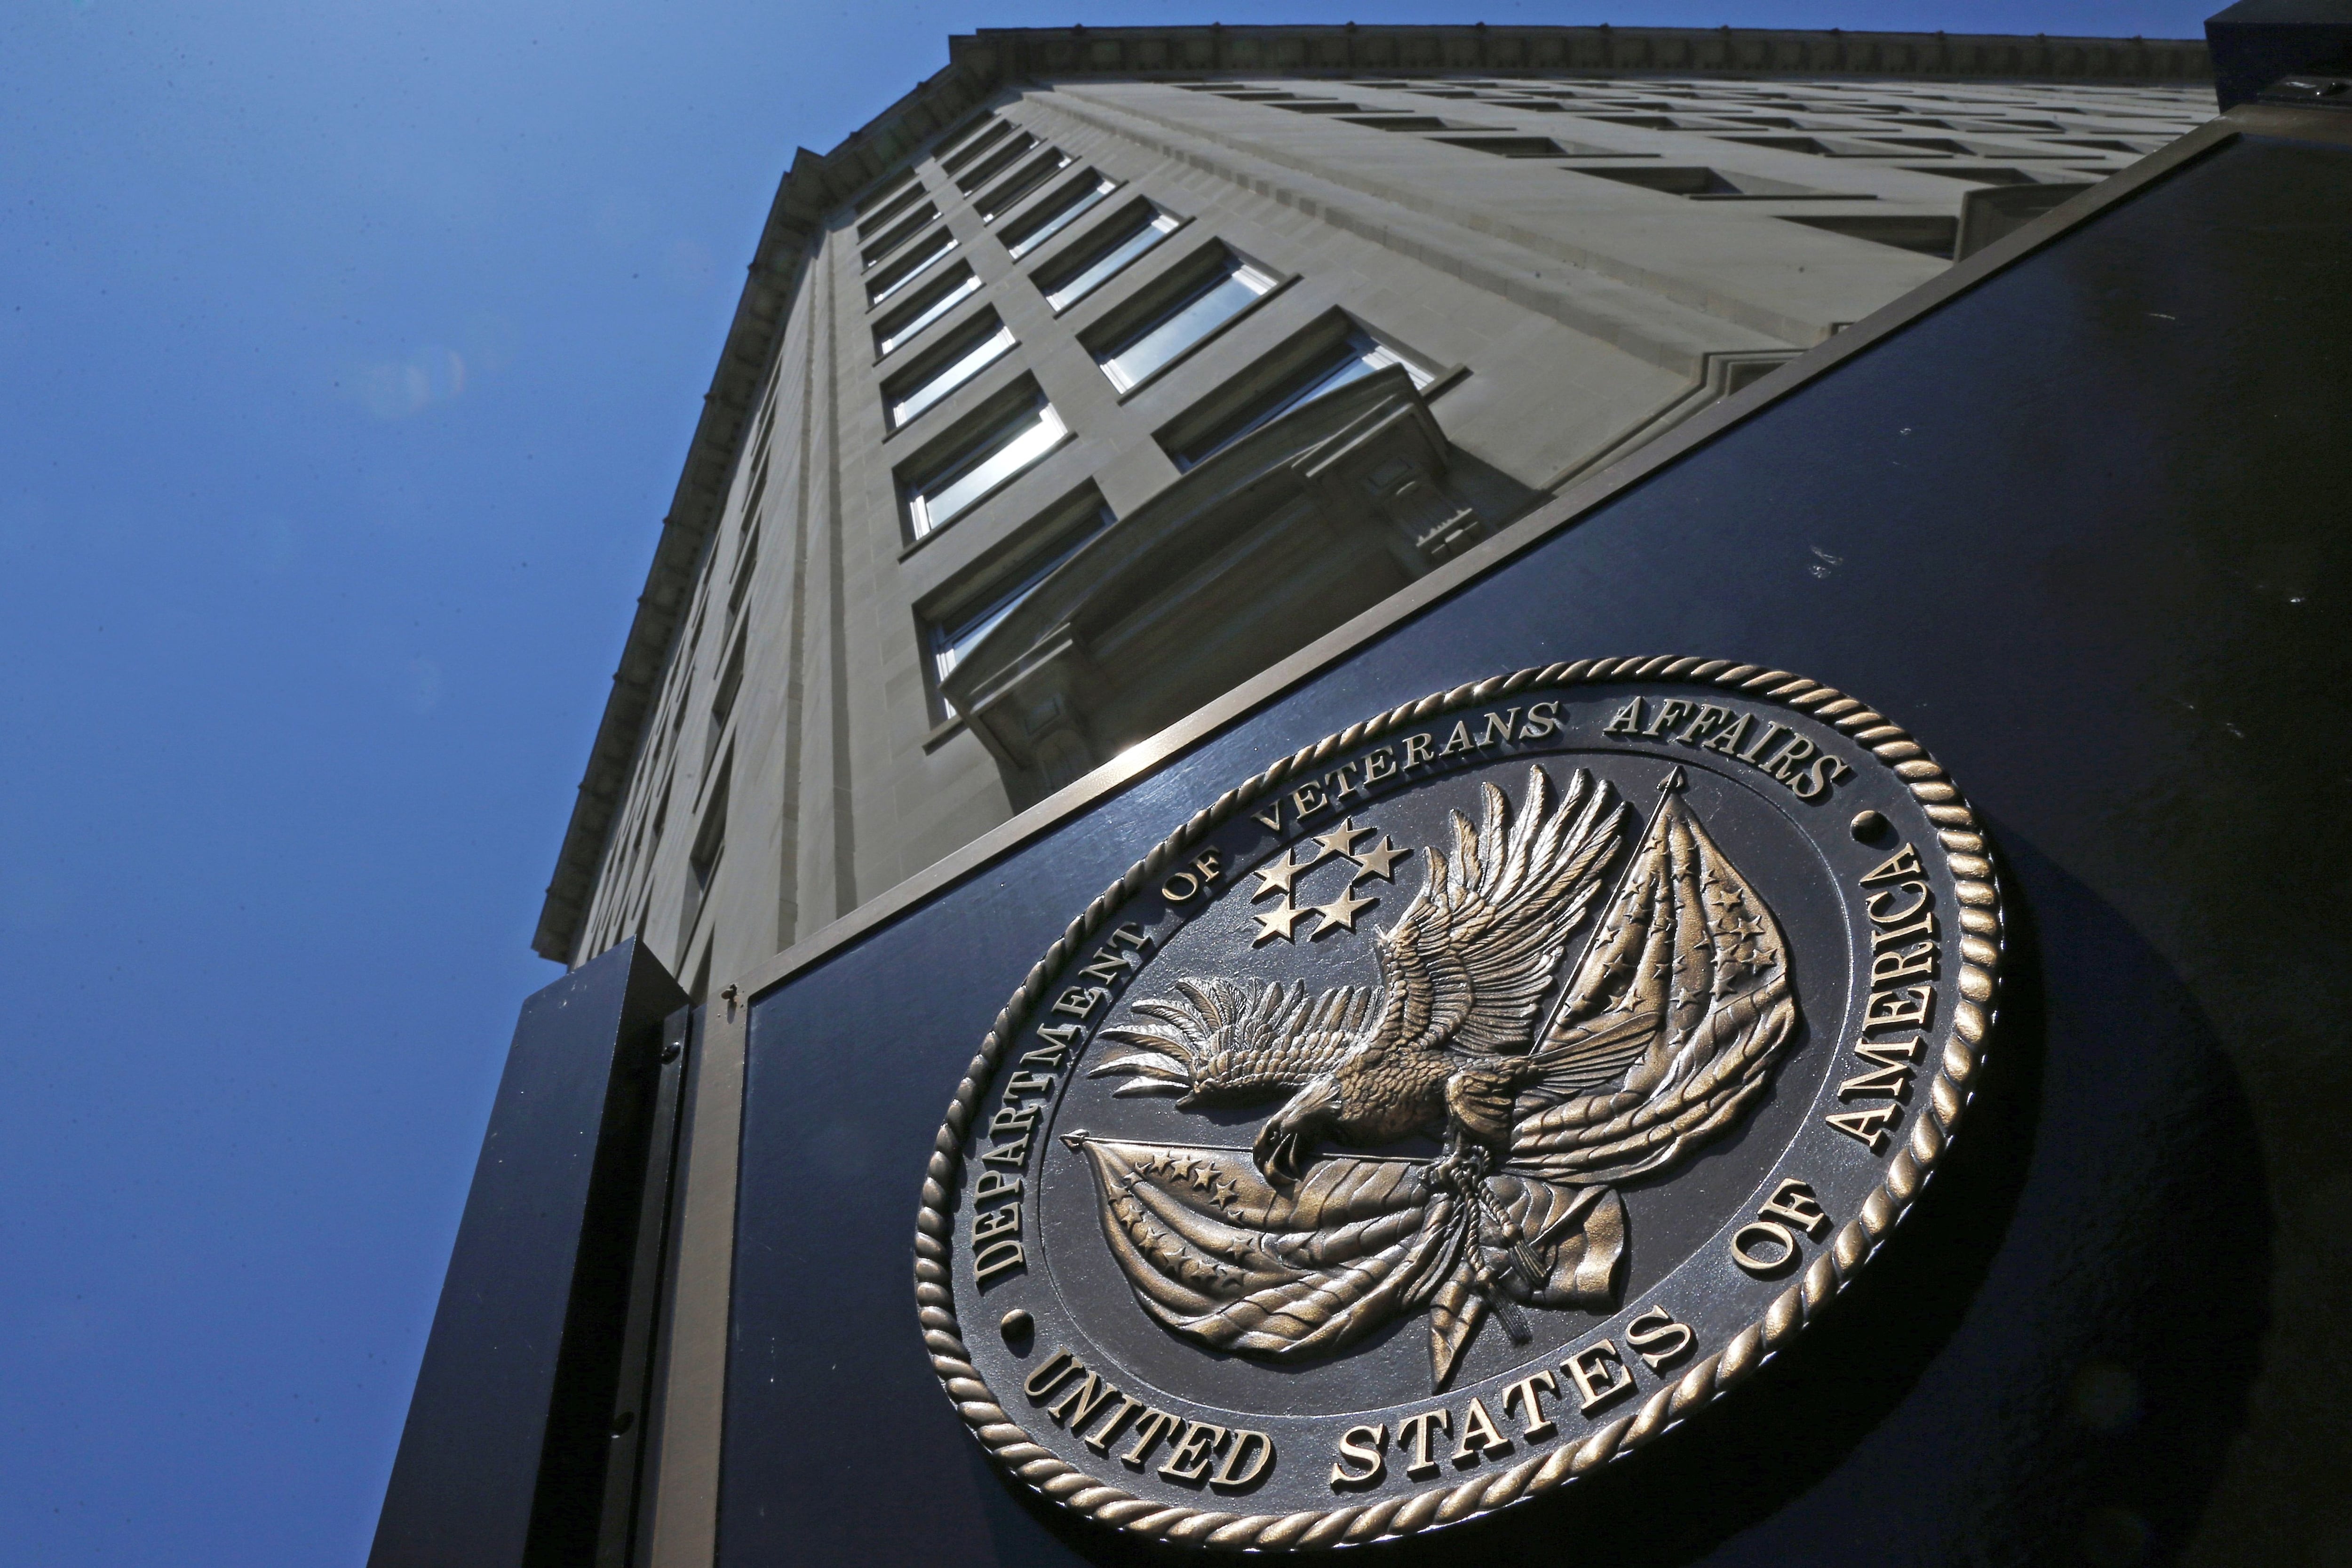 VA proposes updates to disability rating schedules for respiratory,  auditory and mental disorders body systems - VA News